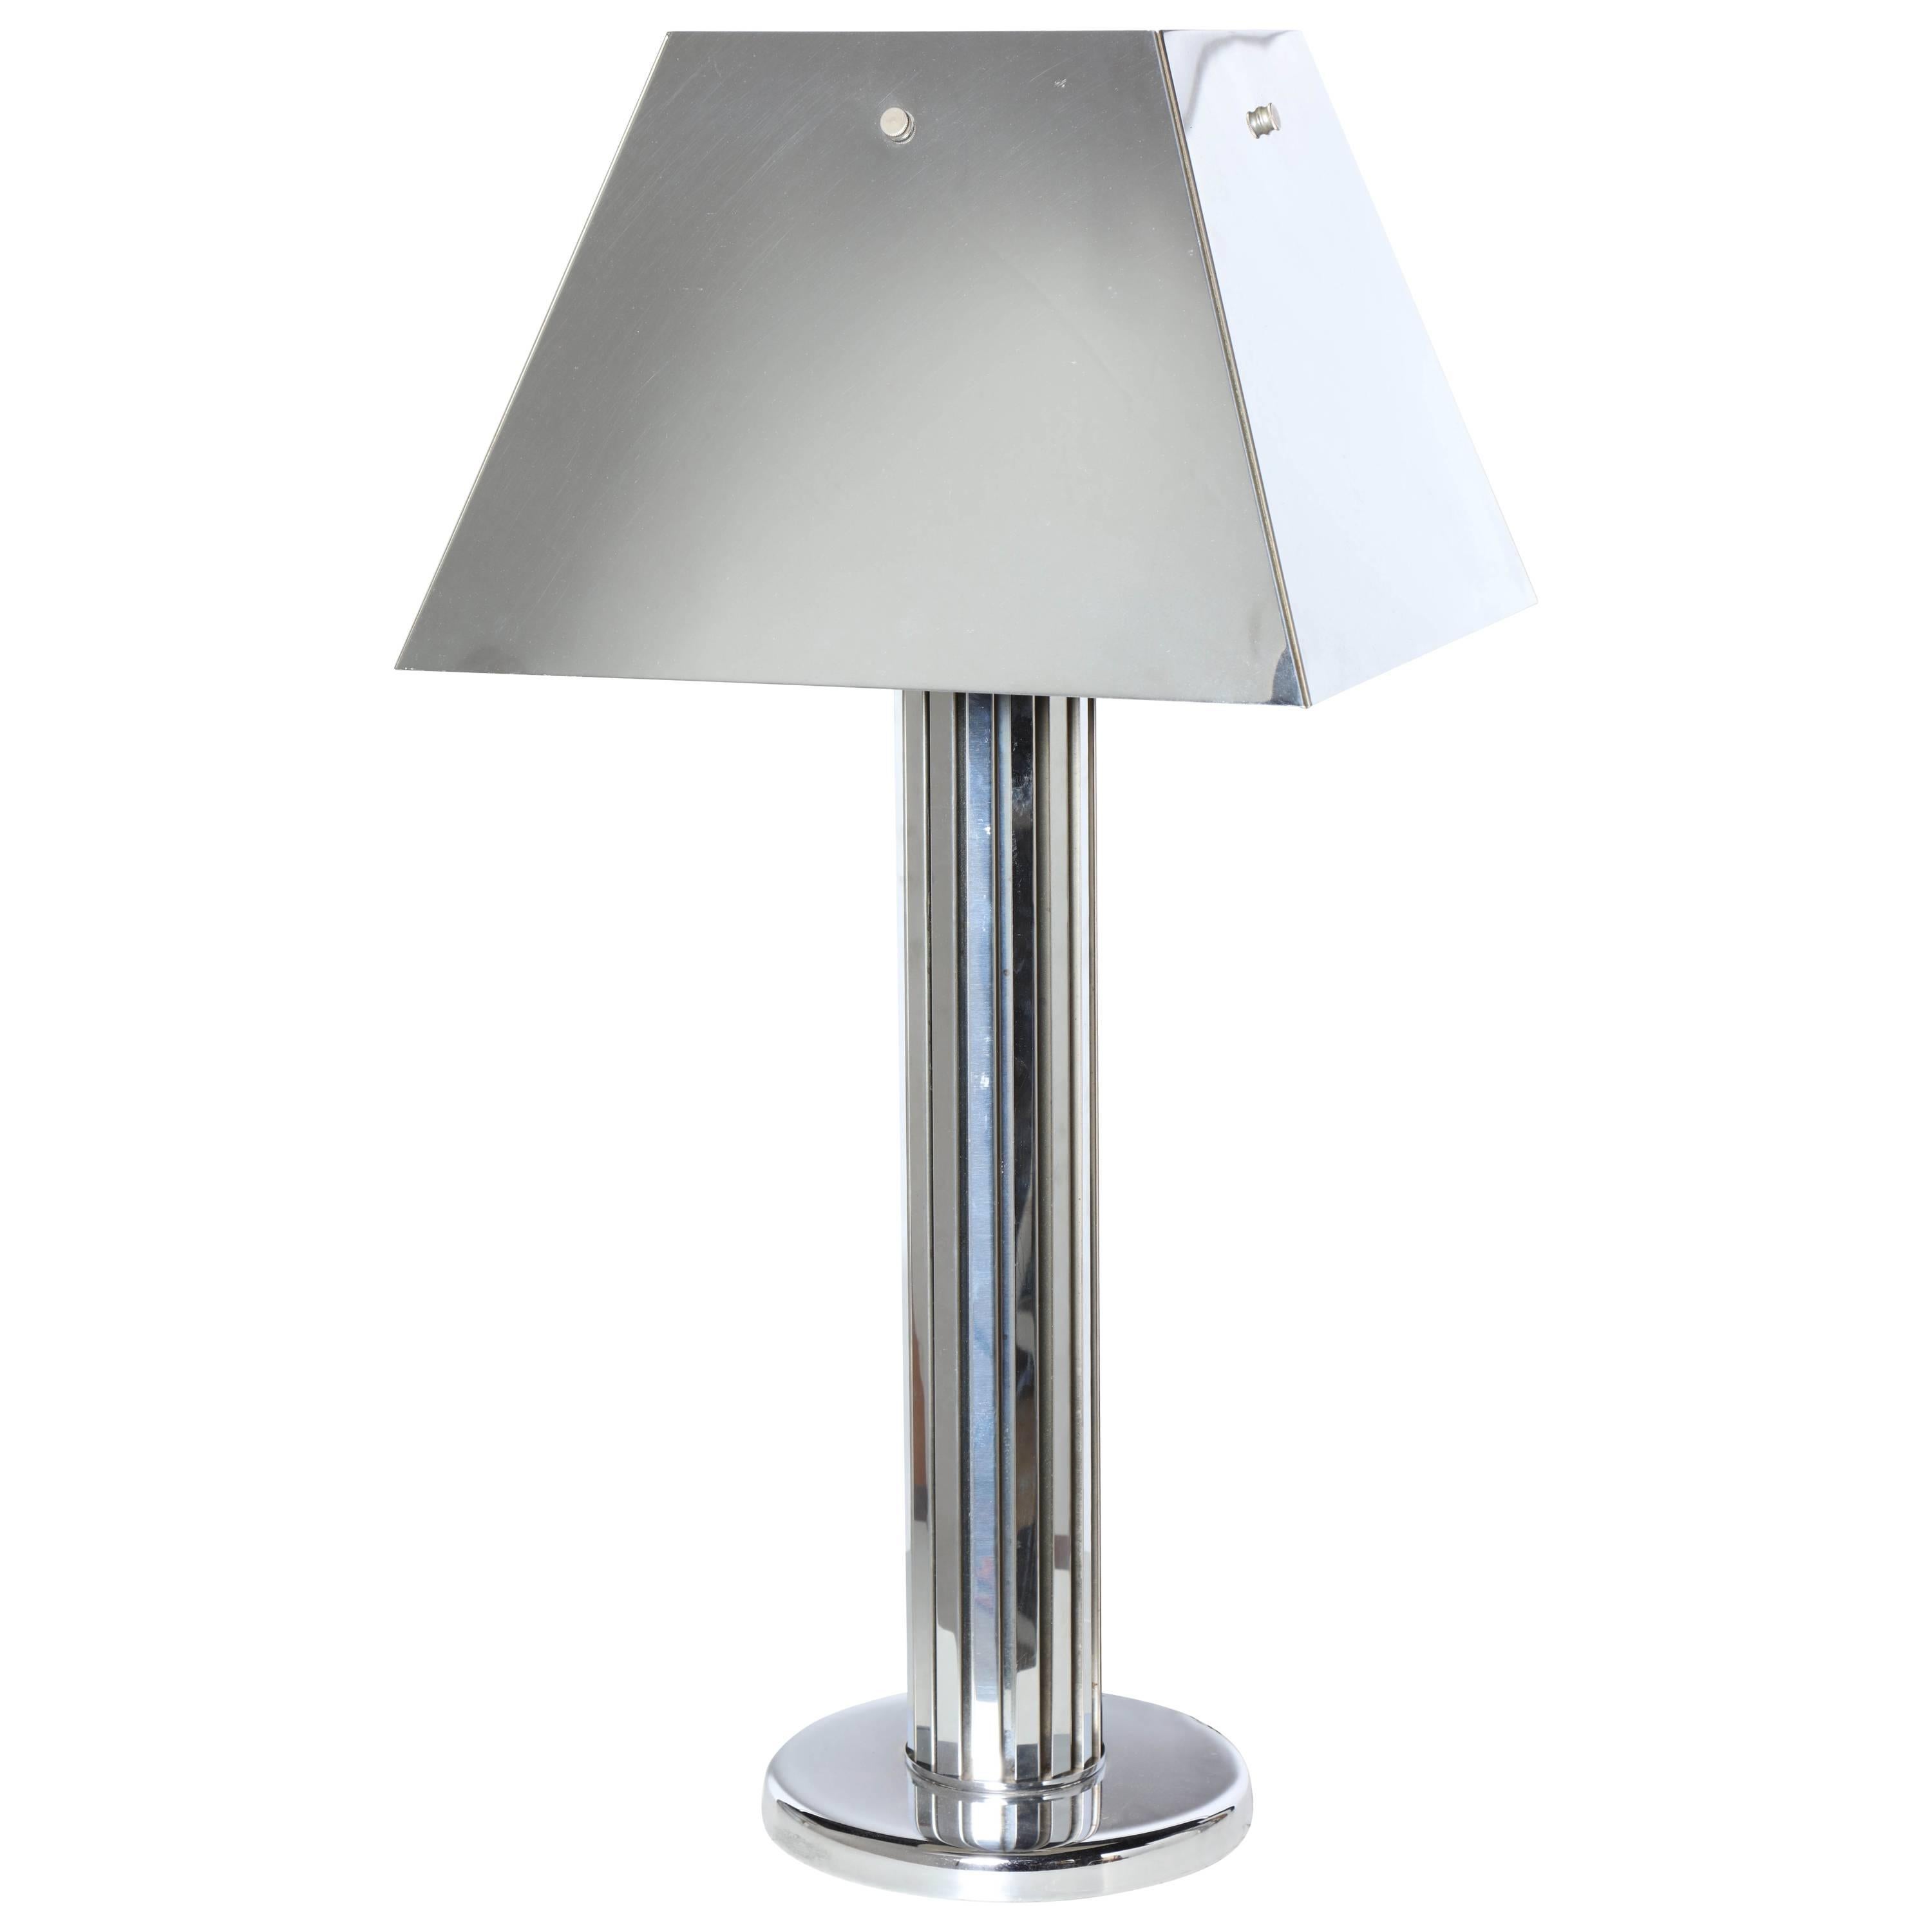 Monumental Curtis Jere Reflective Chrome Table Lamp with Chrome Shade, C. 1970 For Sale